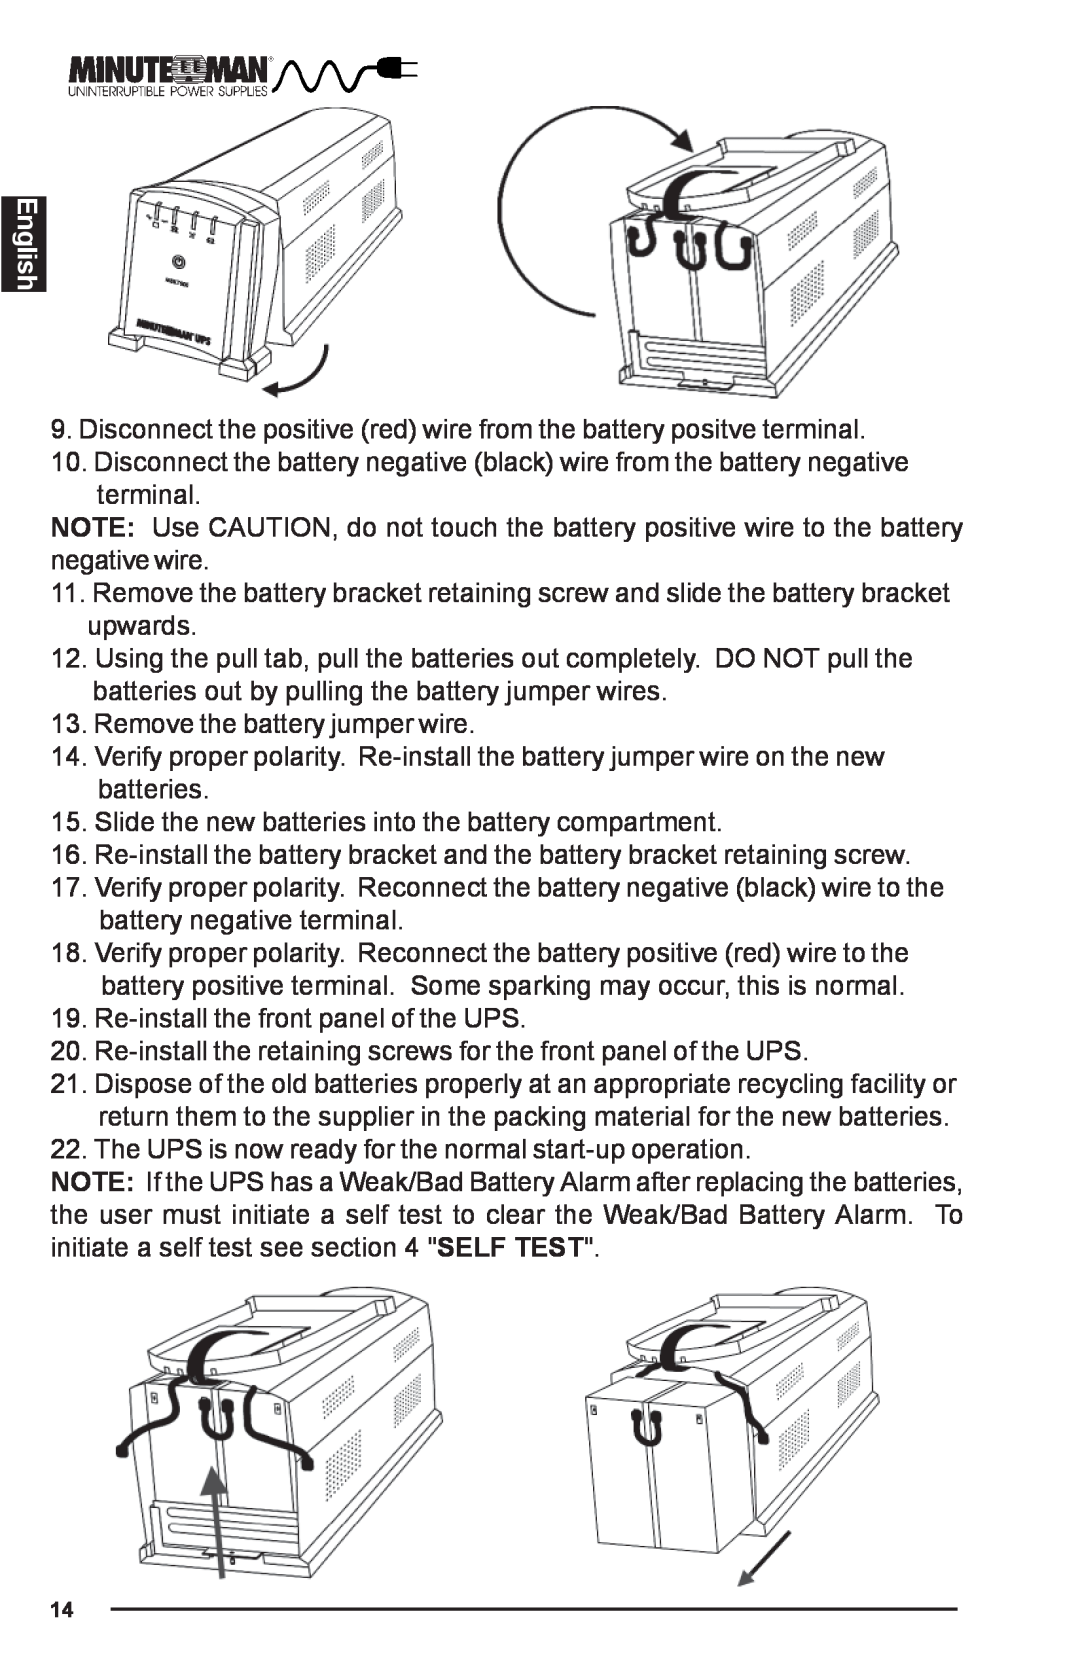 Minuteman UPS MBK-E SERIES user manual English, Disconnect the positive red wire from the battery positve terminal 